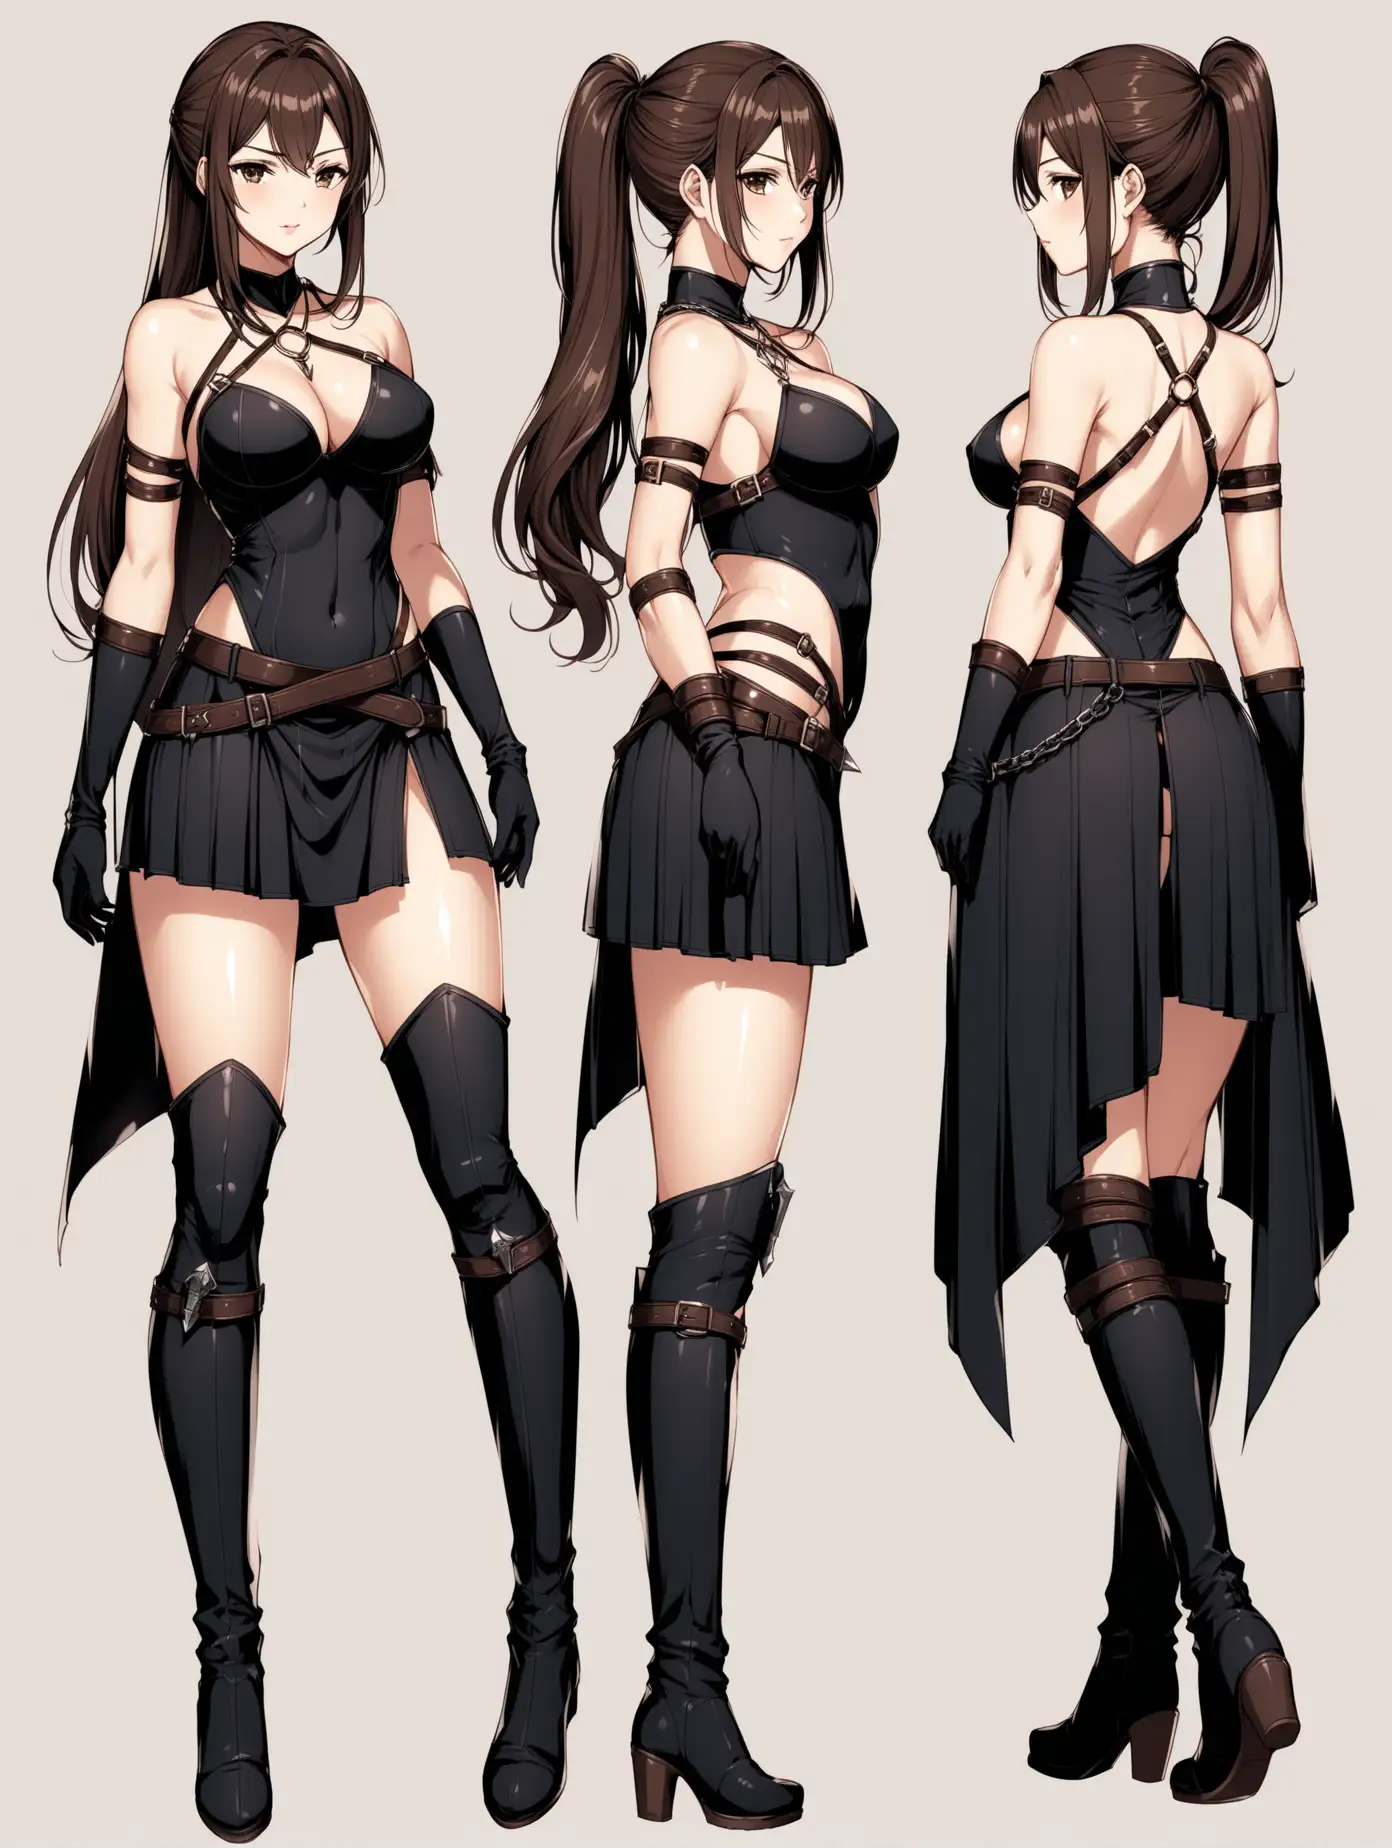 Full body picture of a sensual anime girl, age 25, long body height, breasts size DD, big hips, wavy brunette hair, bangs, long ponytail, huntress outfit in black colors with brown details, front and back sides skirt, open skirt on laterals, knee high boots, one leg side belt with a dagger on it, necklaces, one side arm band, long elbow gloves, view of 2 poses with front and rear sides show